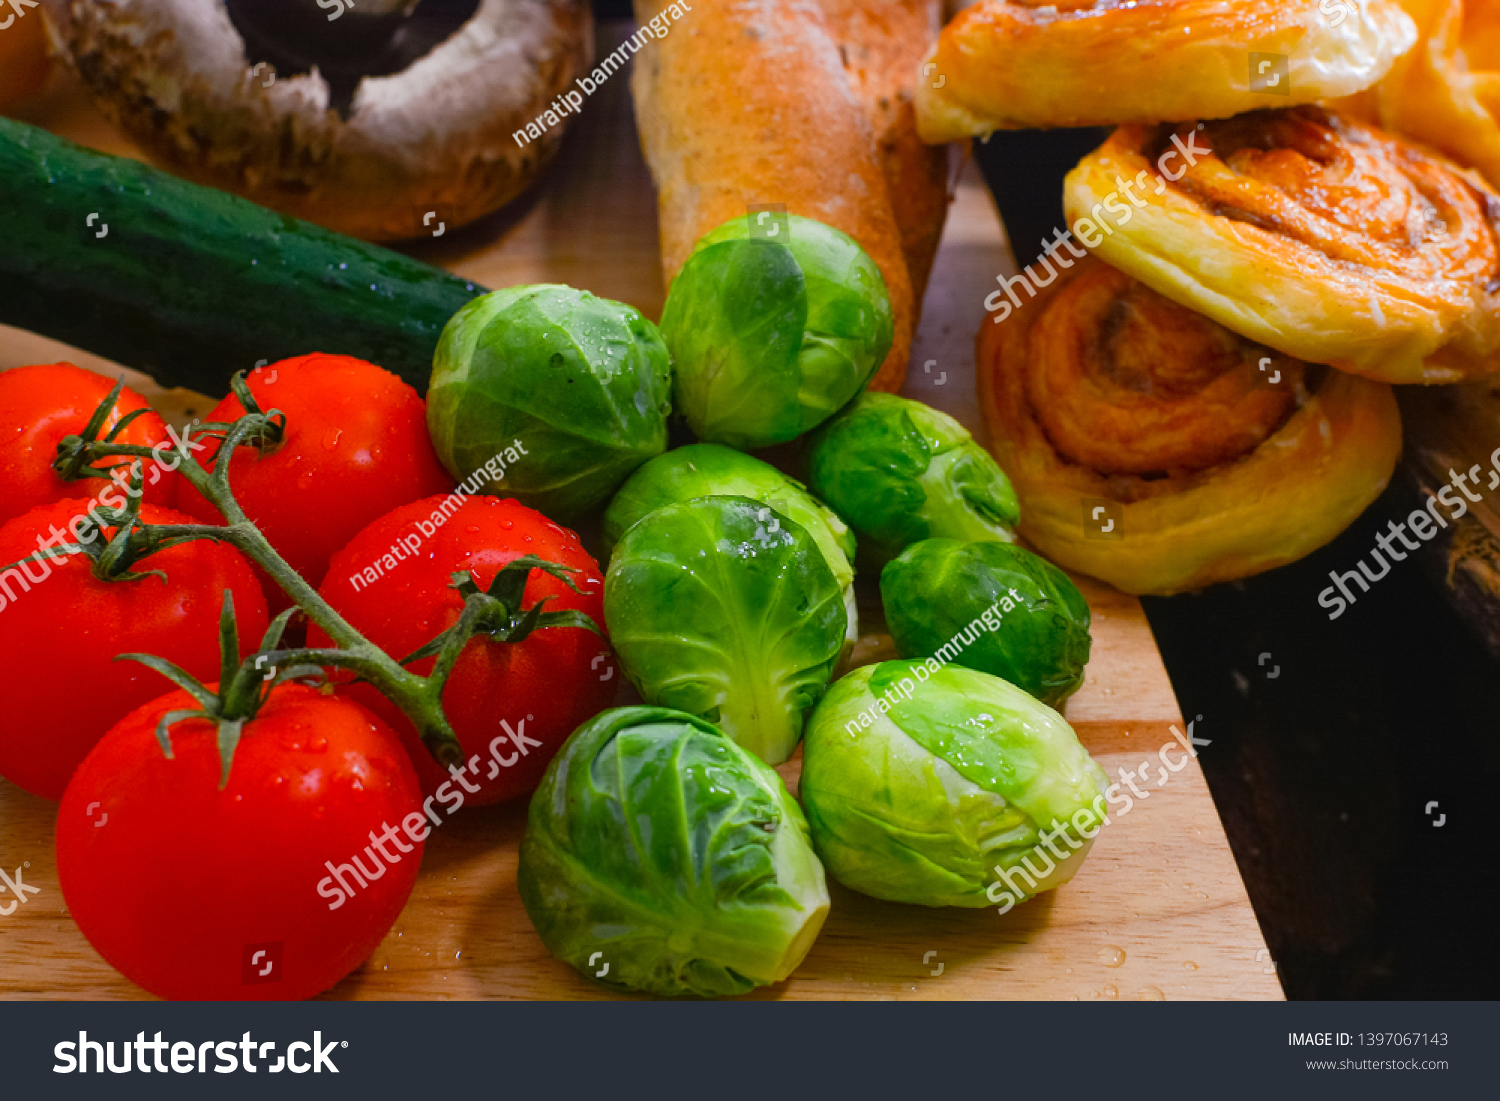 Fresh vegetables and fresh tomato,brussels sprouts, bread, cinnamon rolls, picture placement, still light, shadow #1397067143